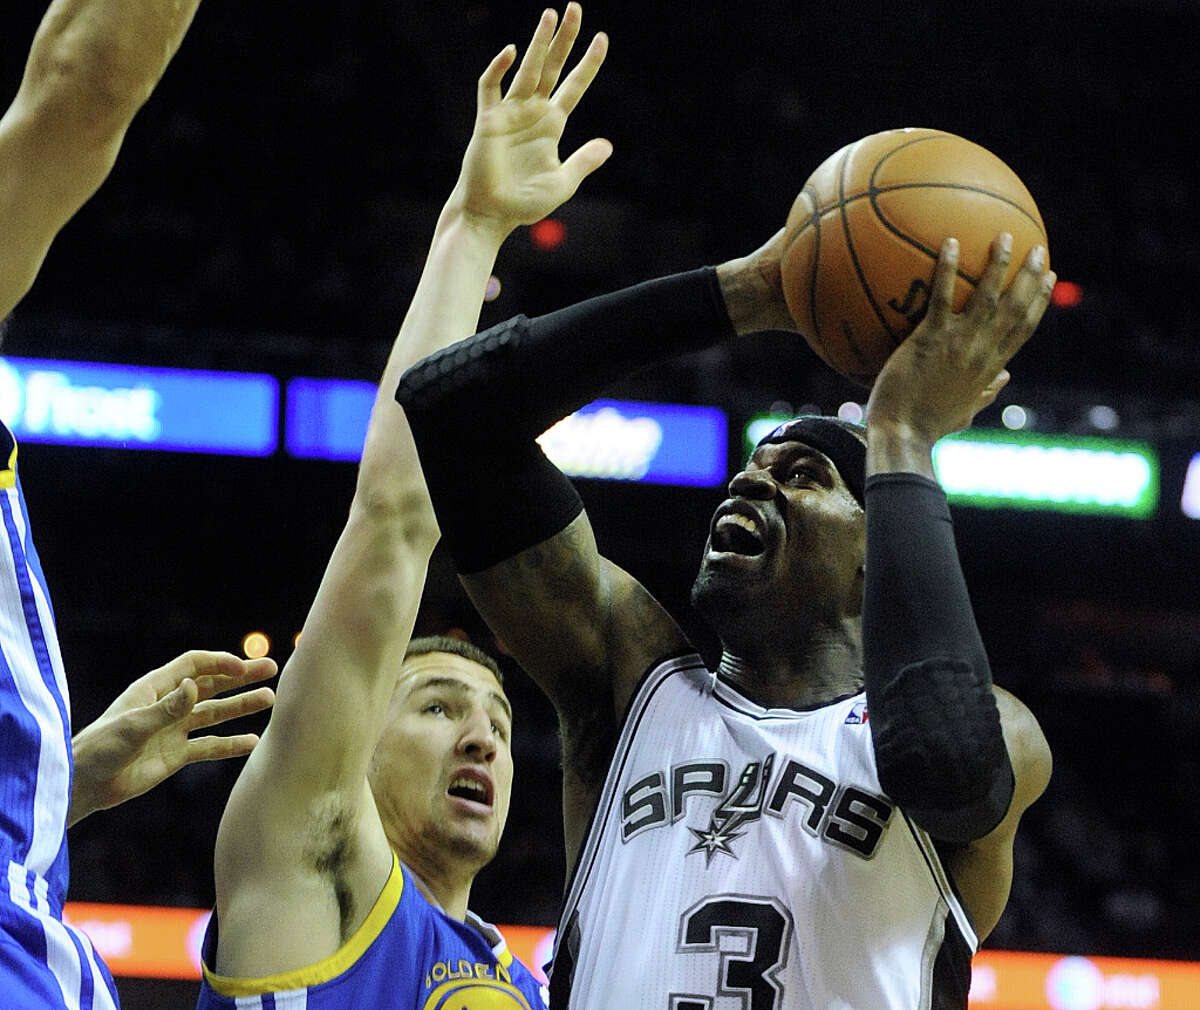 Stephen Jackson of the San Antonio Spurs triple pumps and scores over Klay Thompson of Golden State during NBA action at the AT&T Center on Wednesday, March 20, 2013.